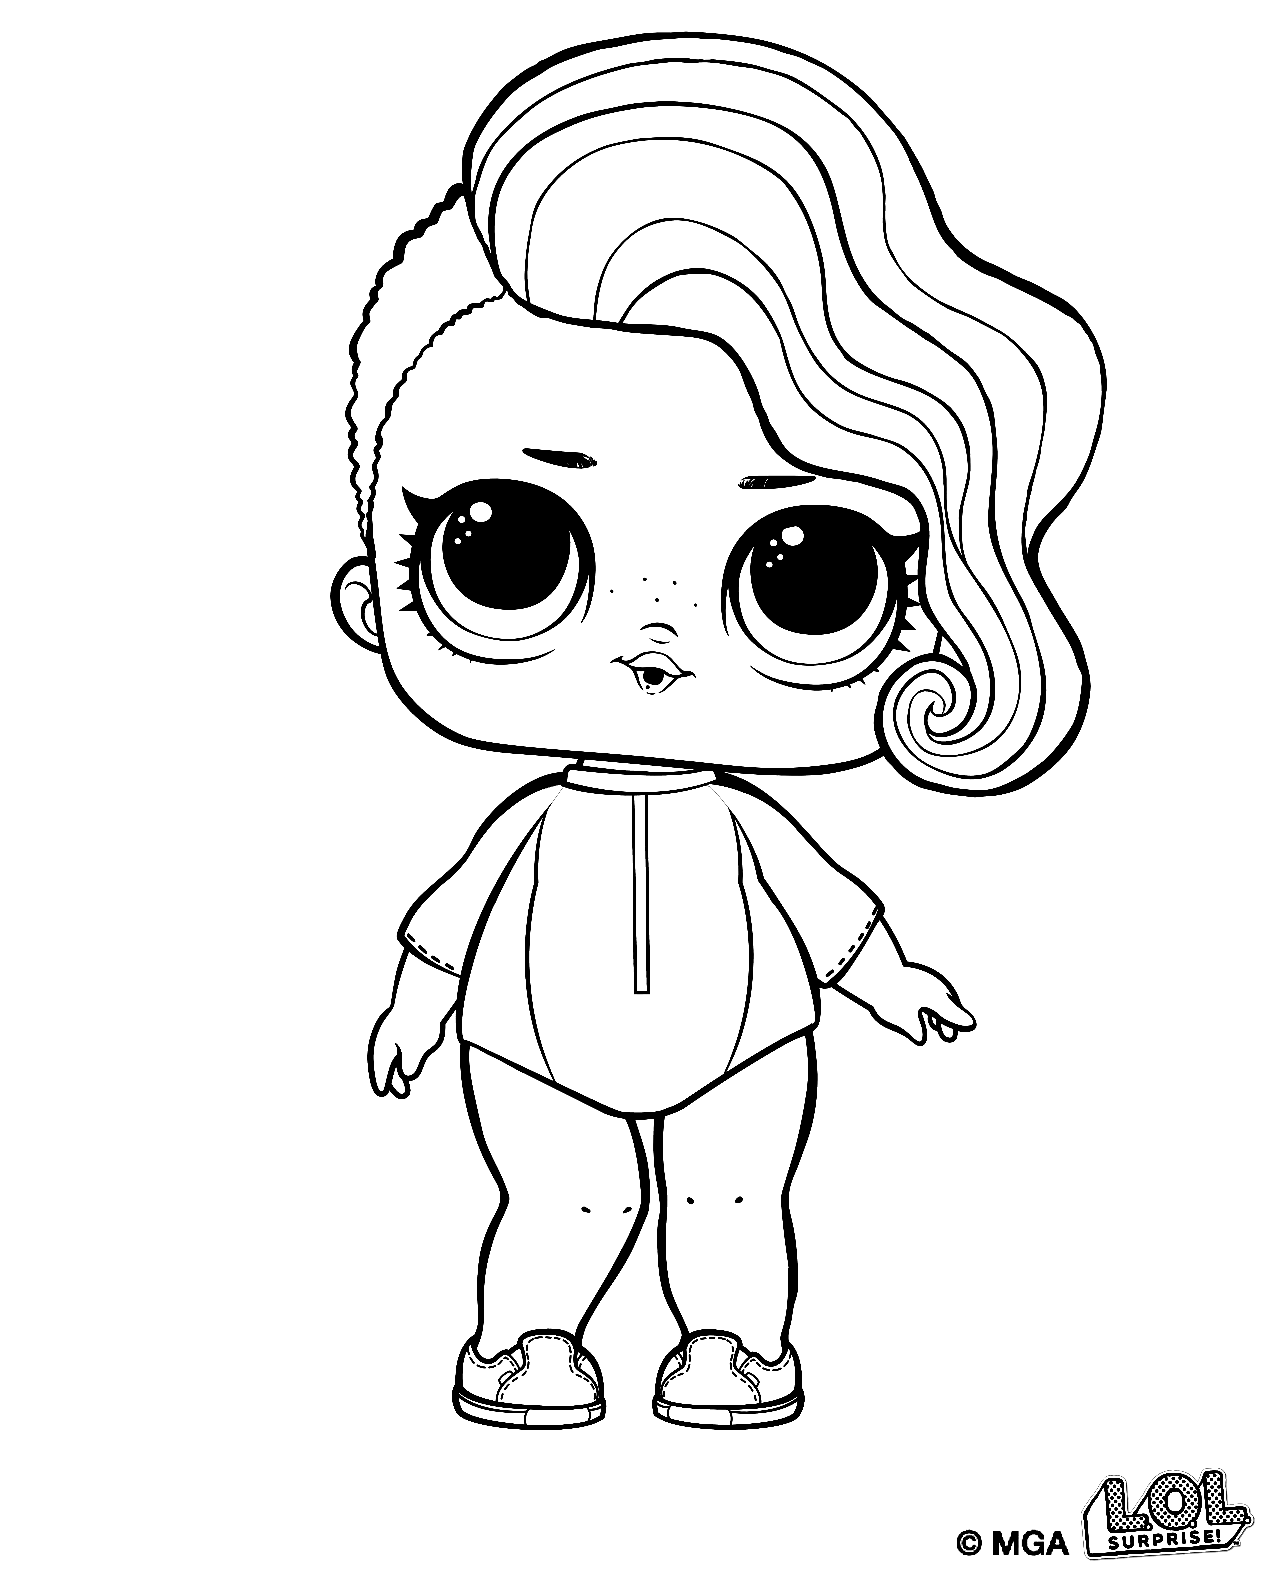 Surfer Babe Coloring Pages - Lol Surprise Doll Coloring Pages - Coloring  Pages For Kids And Adults